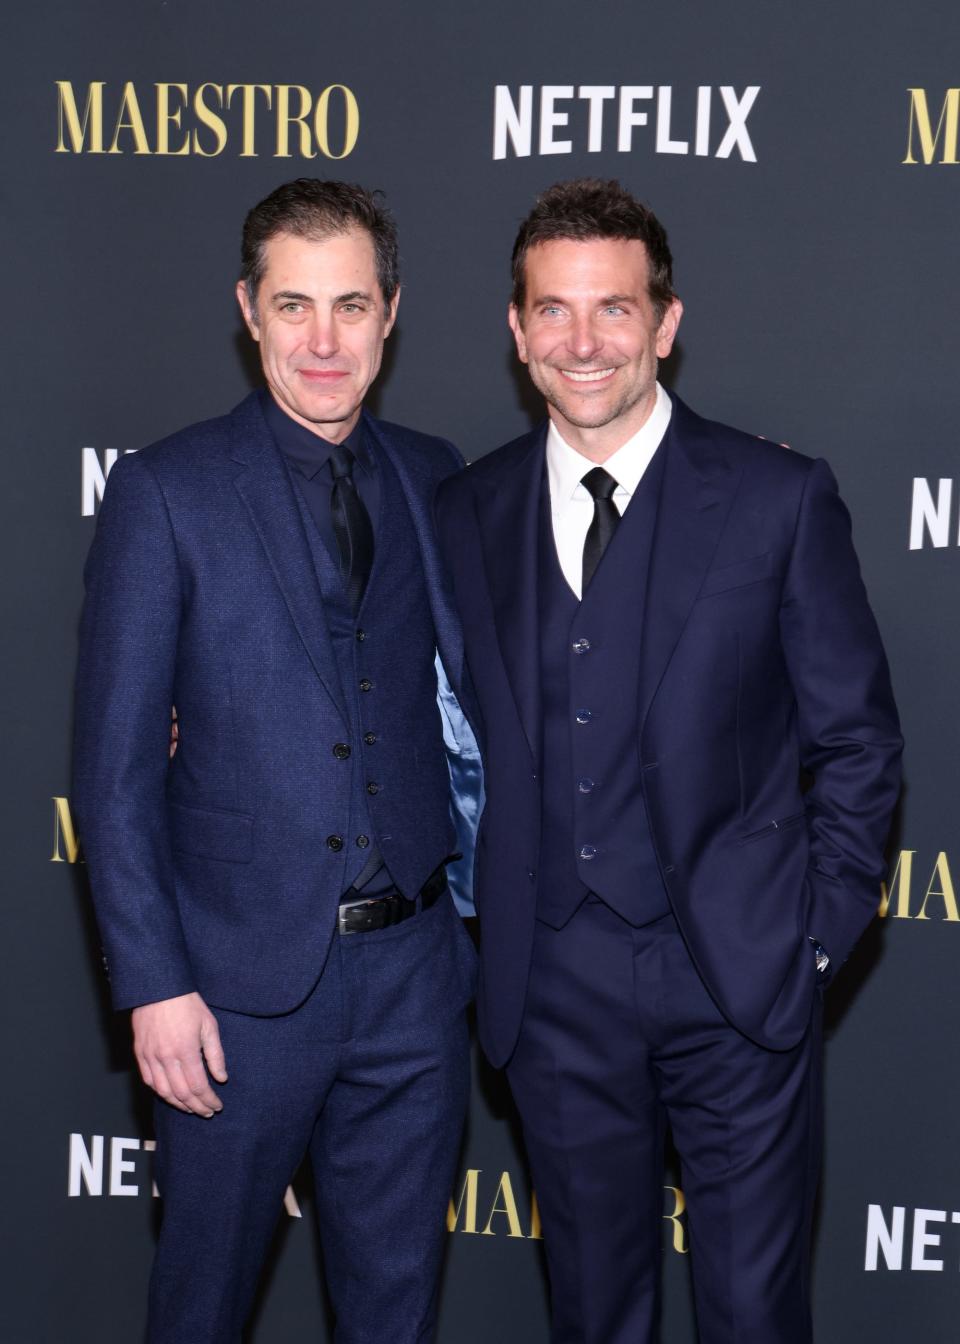 Josh Singer and Bradley Cooper in blue suits at Netflix's "Maestro" LA special screening